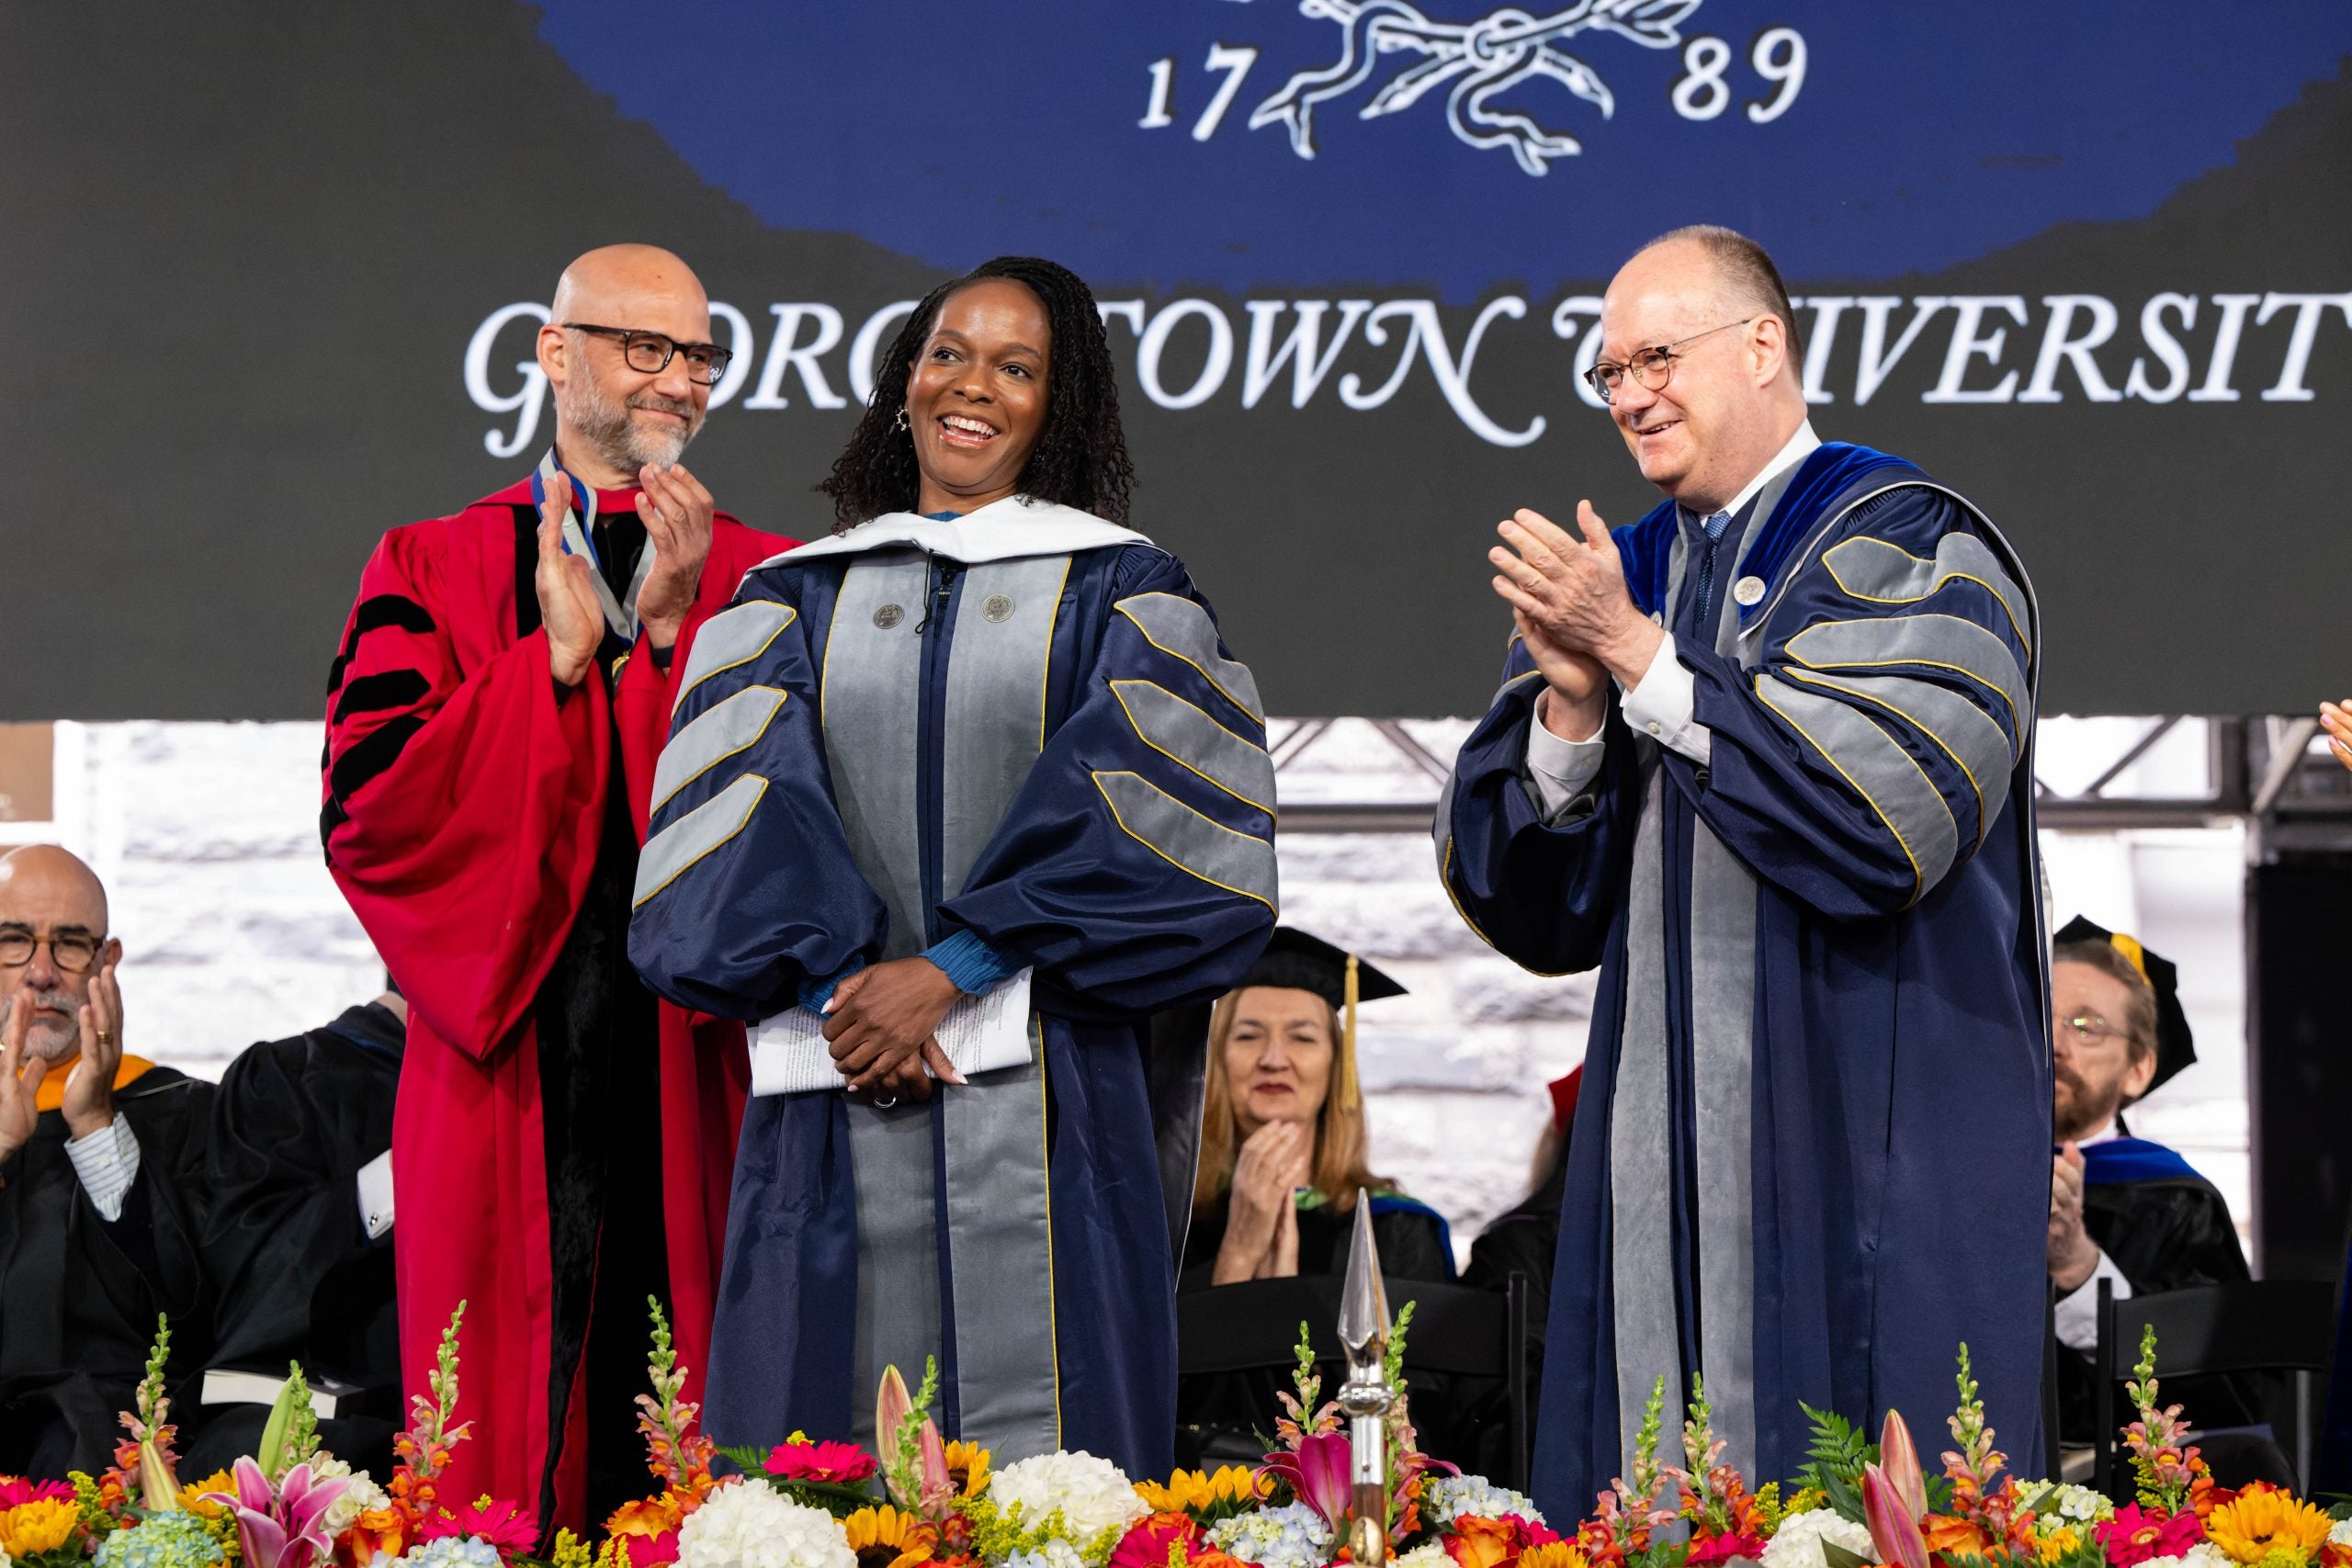 Imani Perry getting her honorary degree on stage with President DiGioia